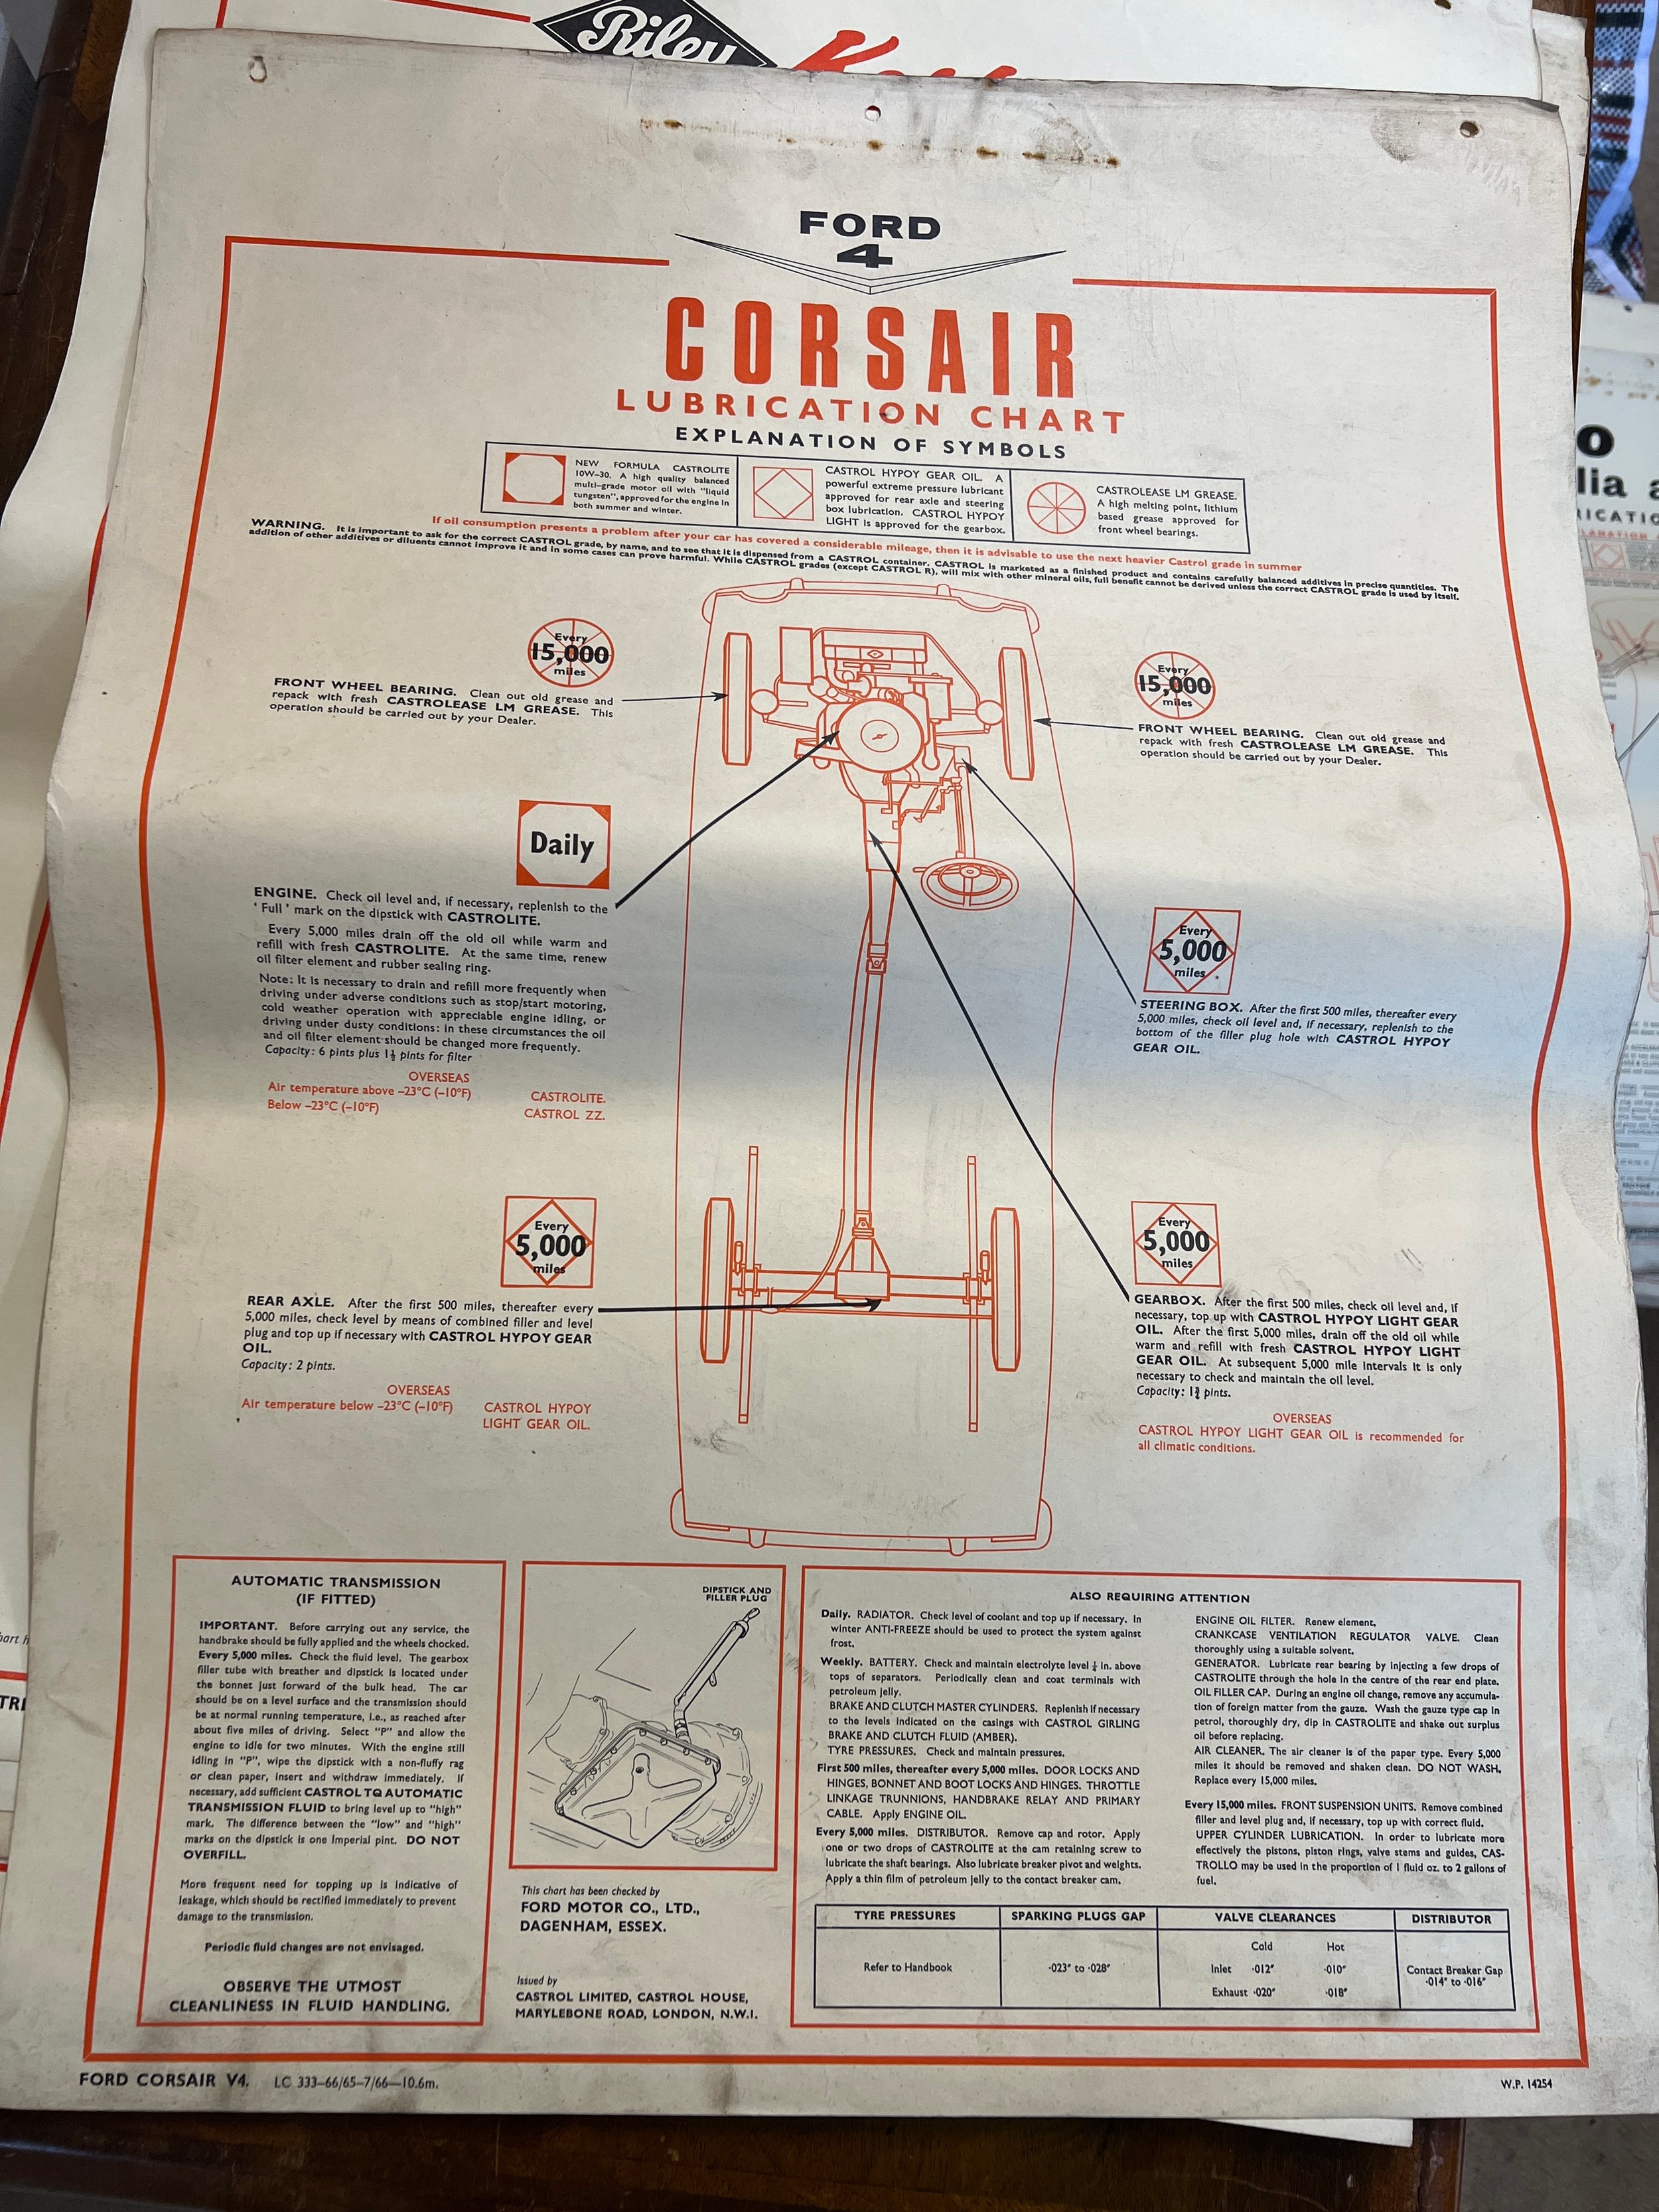 Thirty one vintage car lubrication charts to include Wolseley, Morris, MG 1100, Morris 1100, - Image 22 of 31